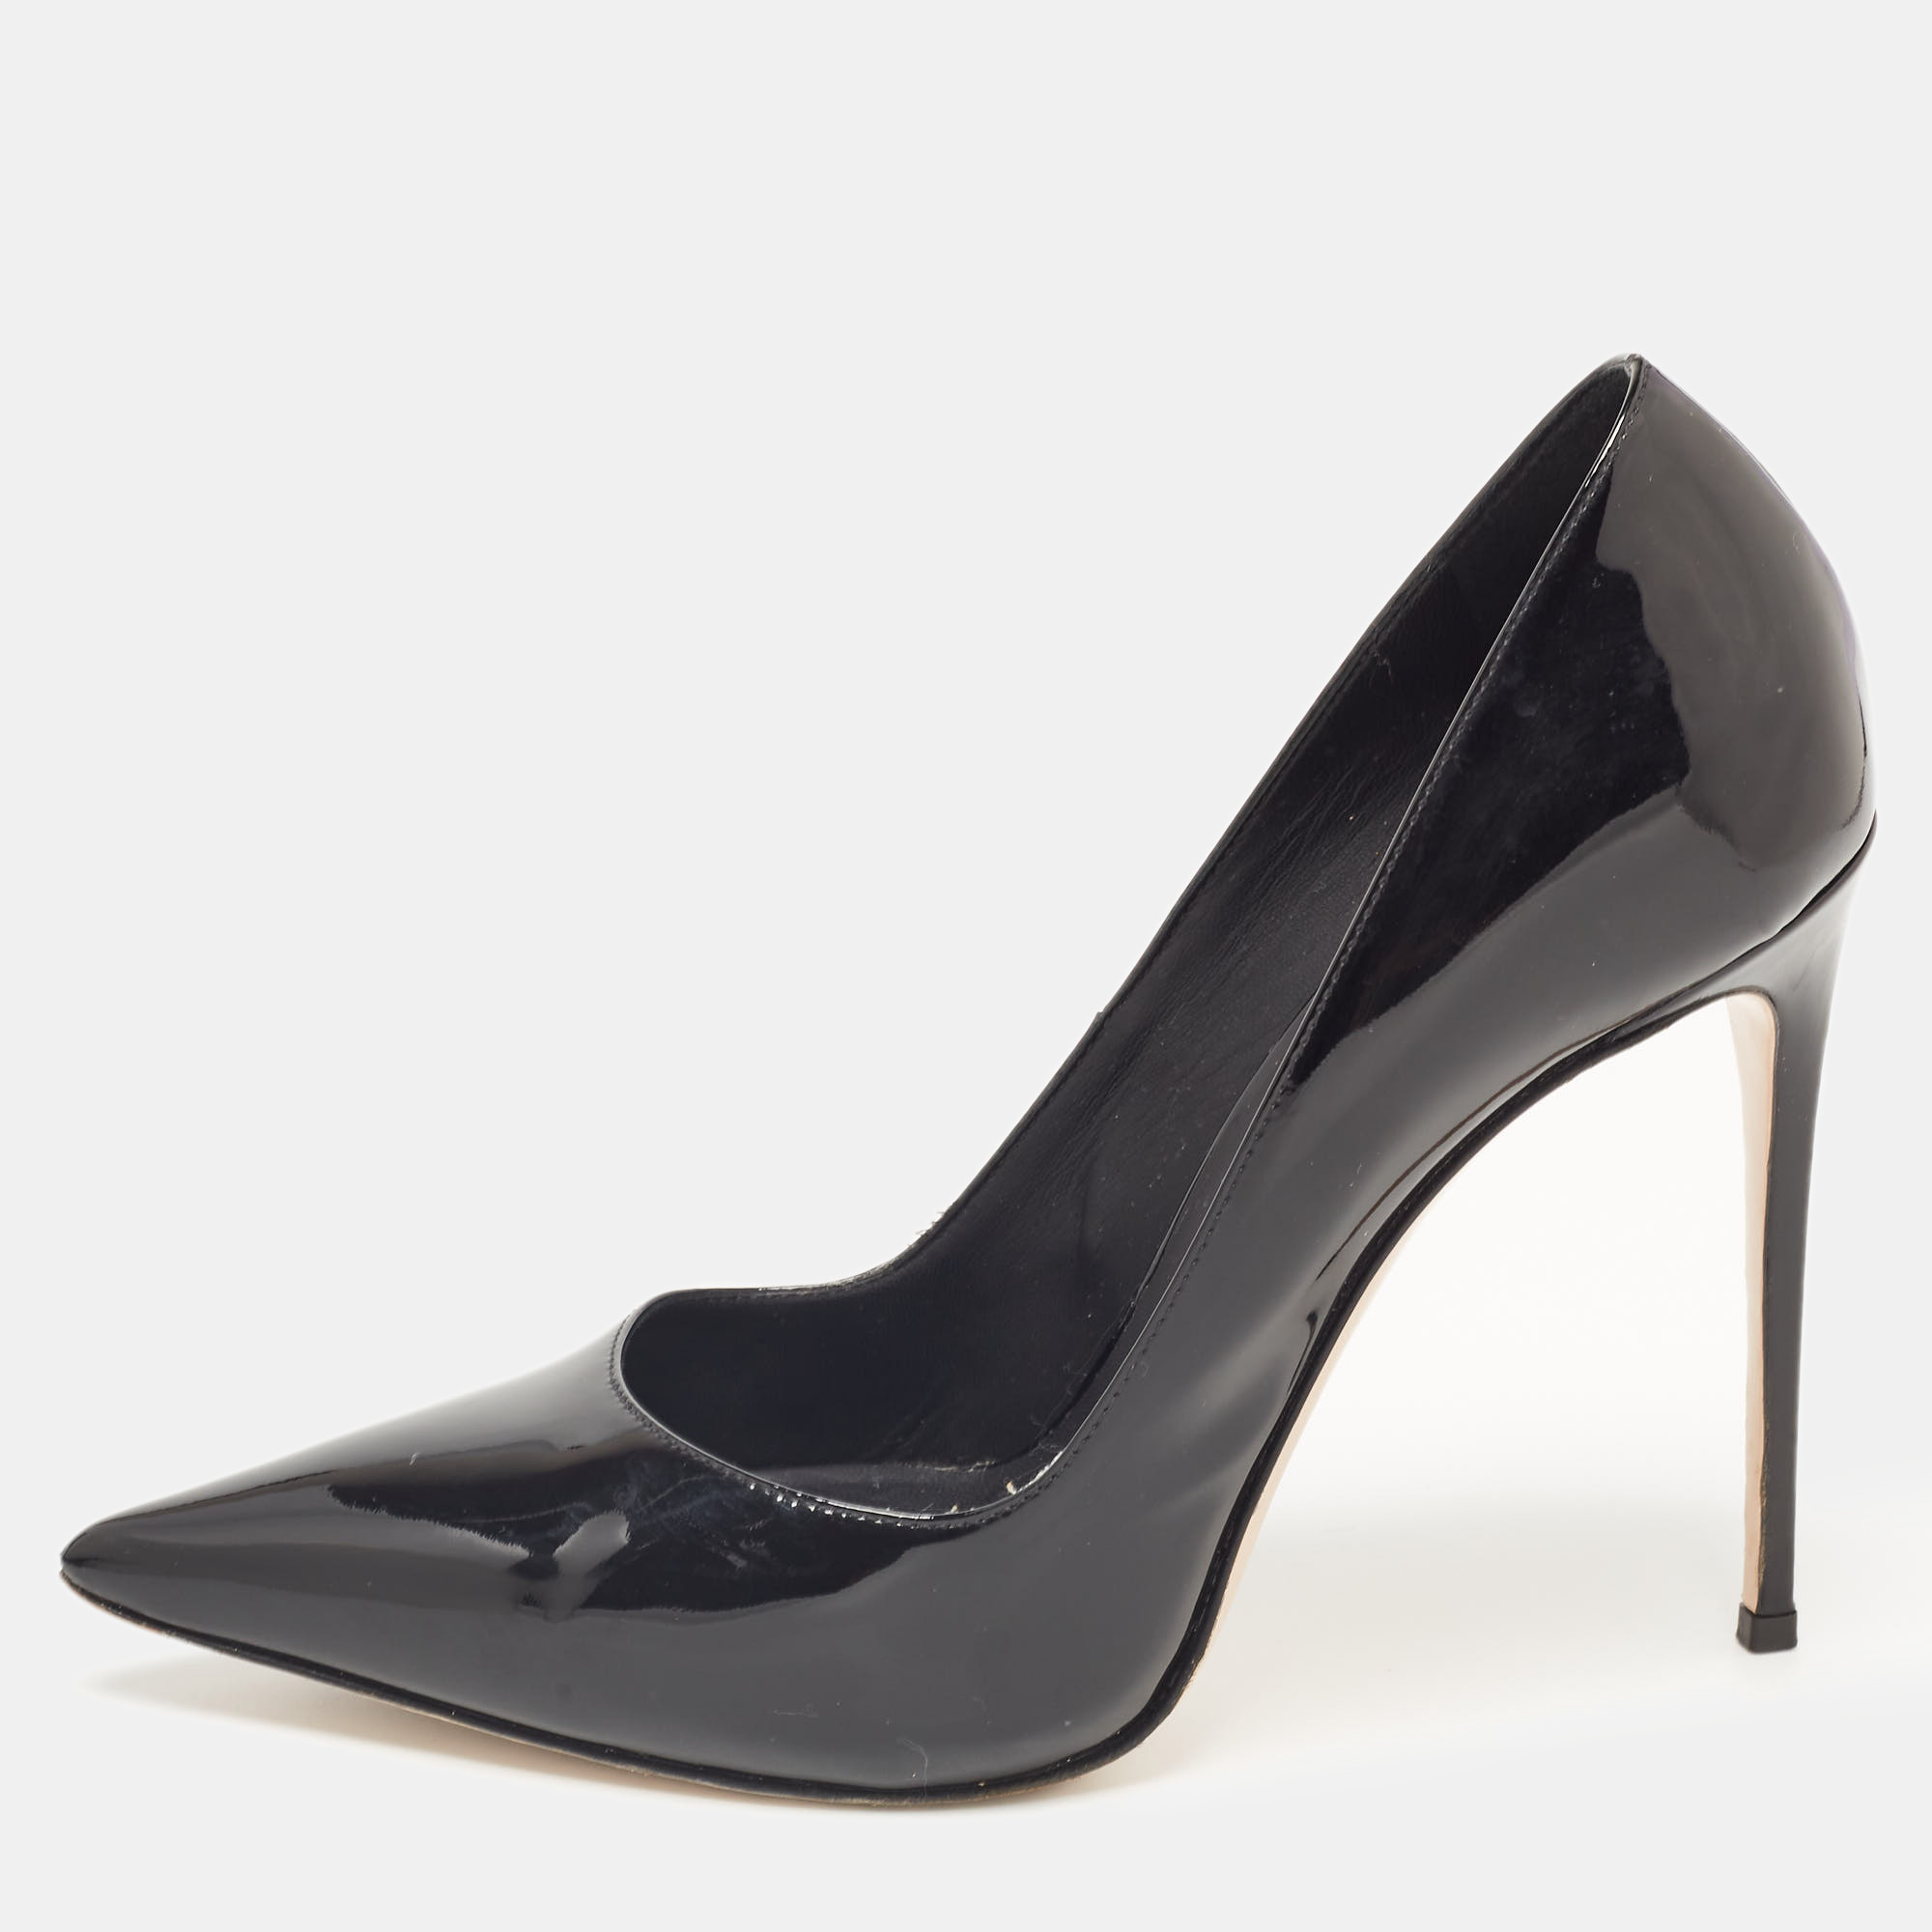 Le Silla Black Patent Leather Pointed Toe Pumps Size 39.5